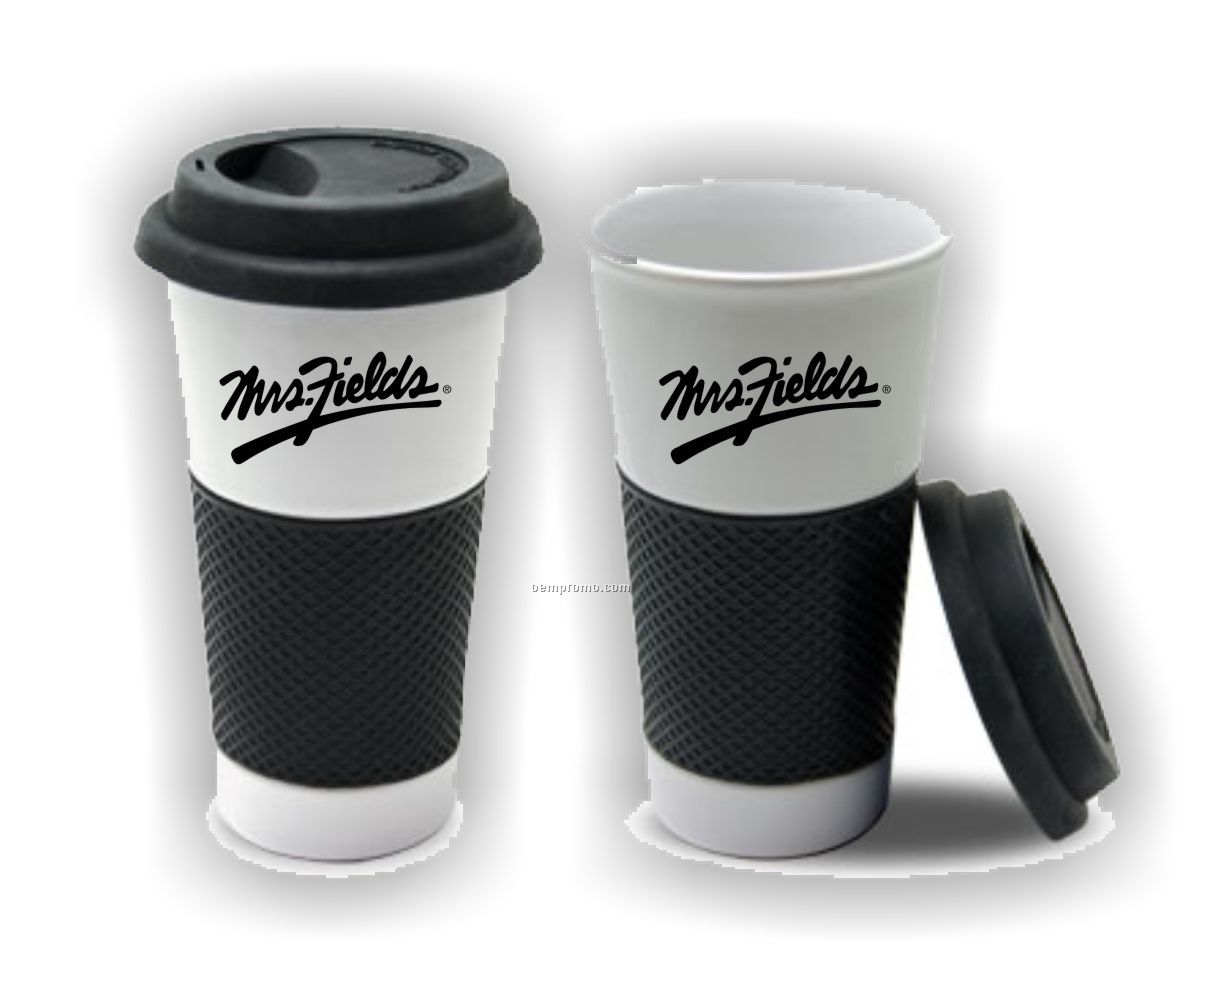 16 Oz. Ceramic Commuter Mug With Silicon Sleeve And Fitted Lid